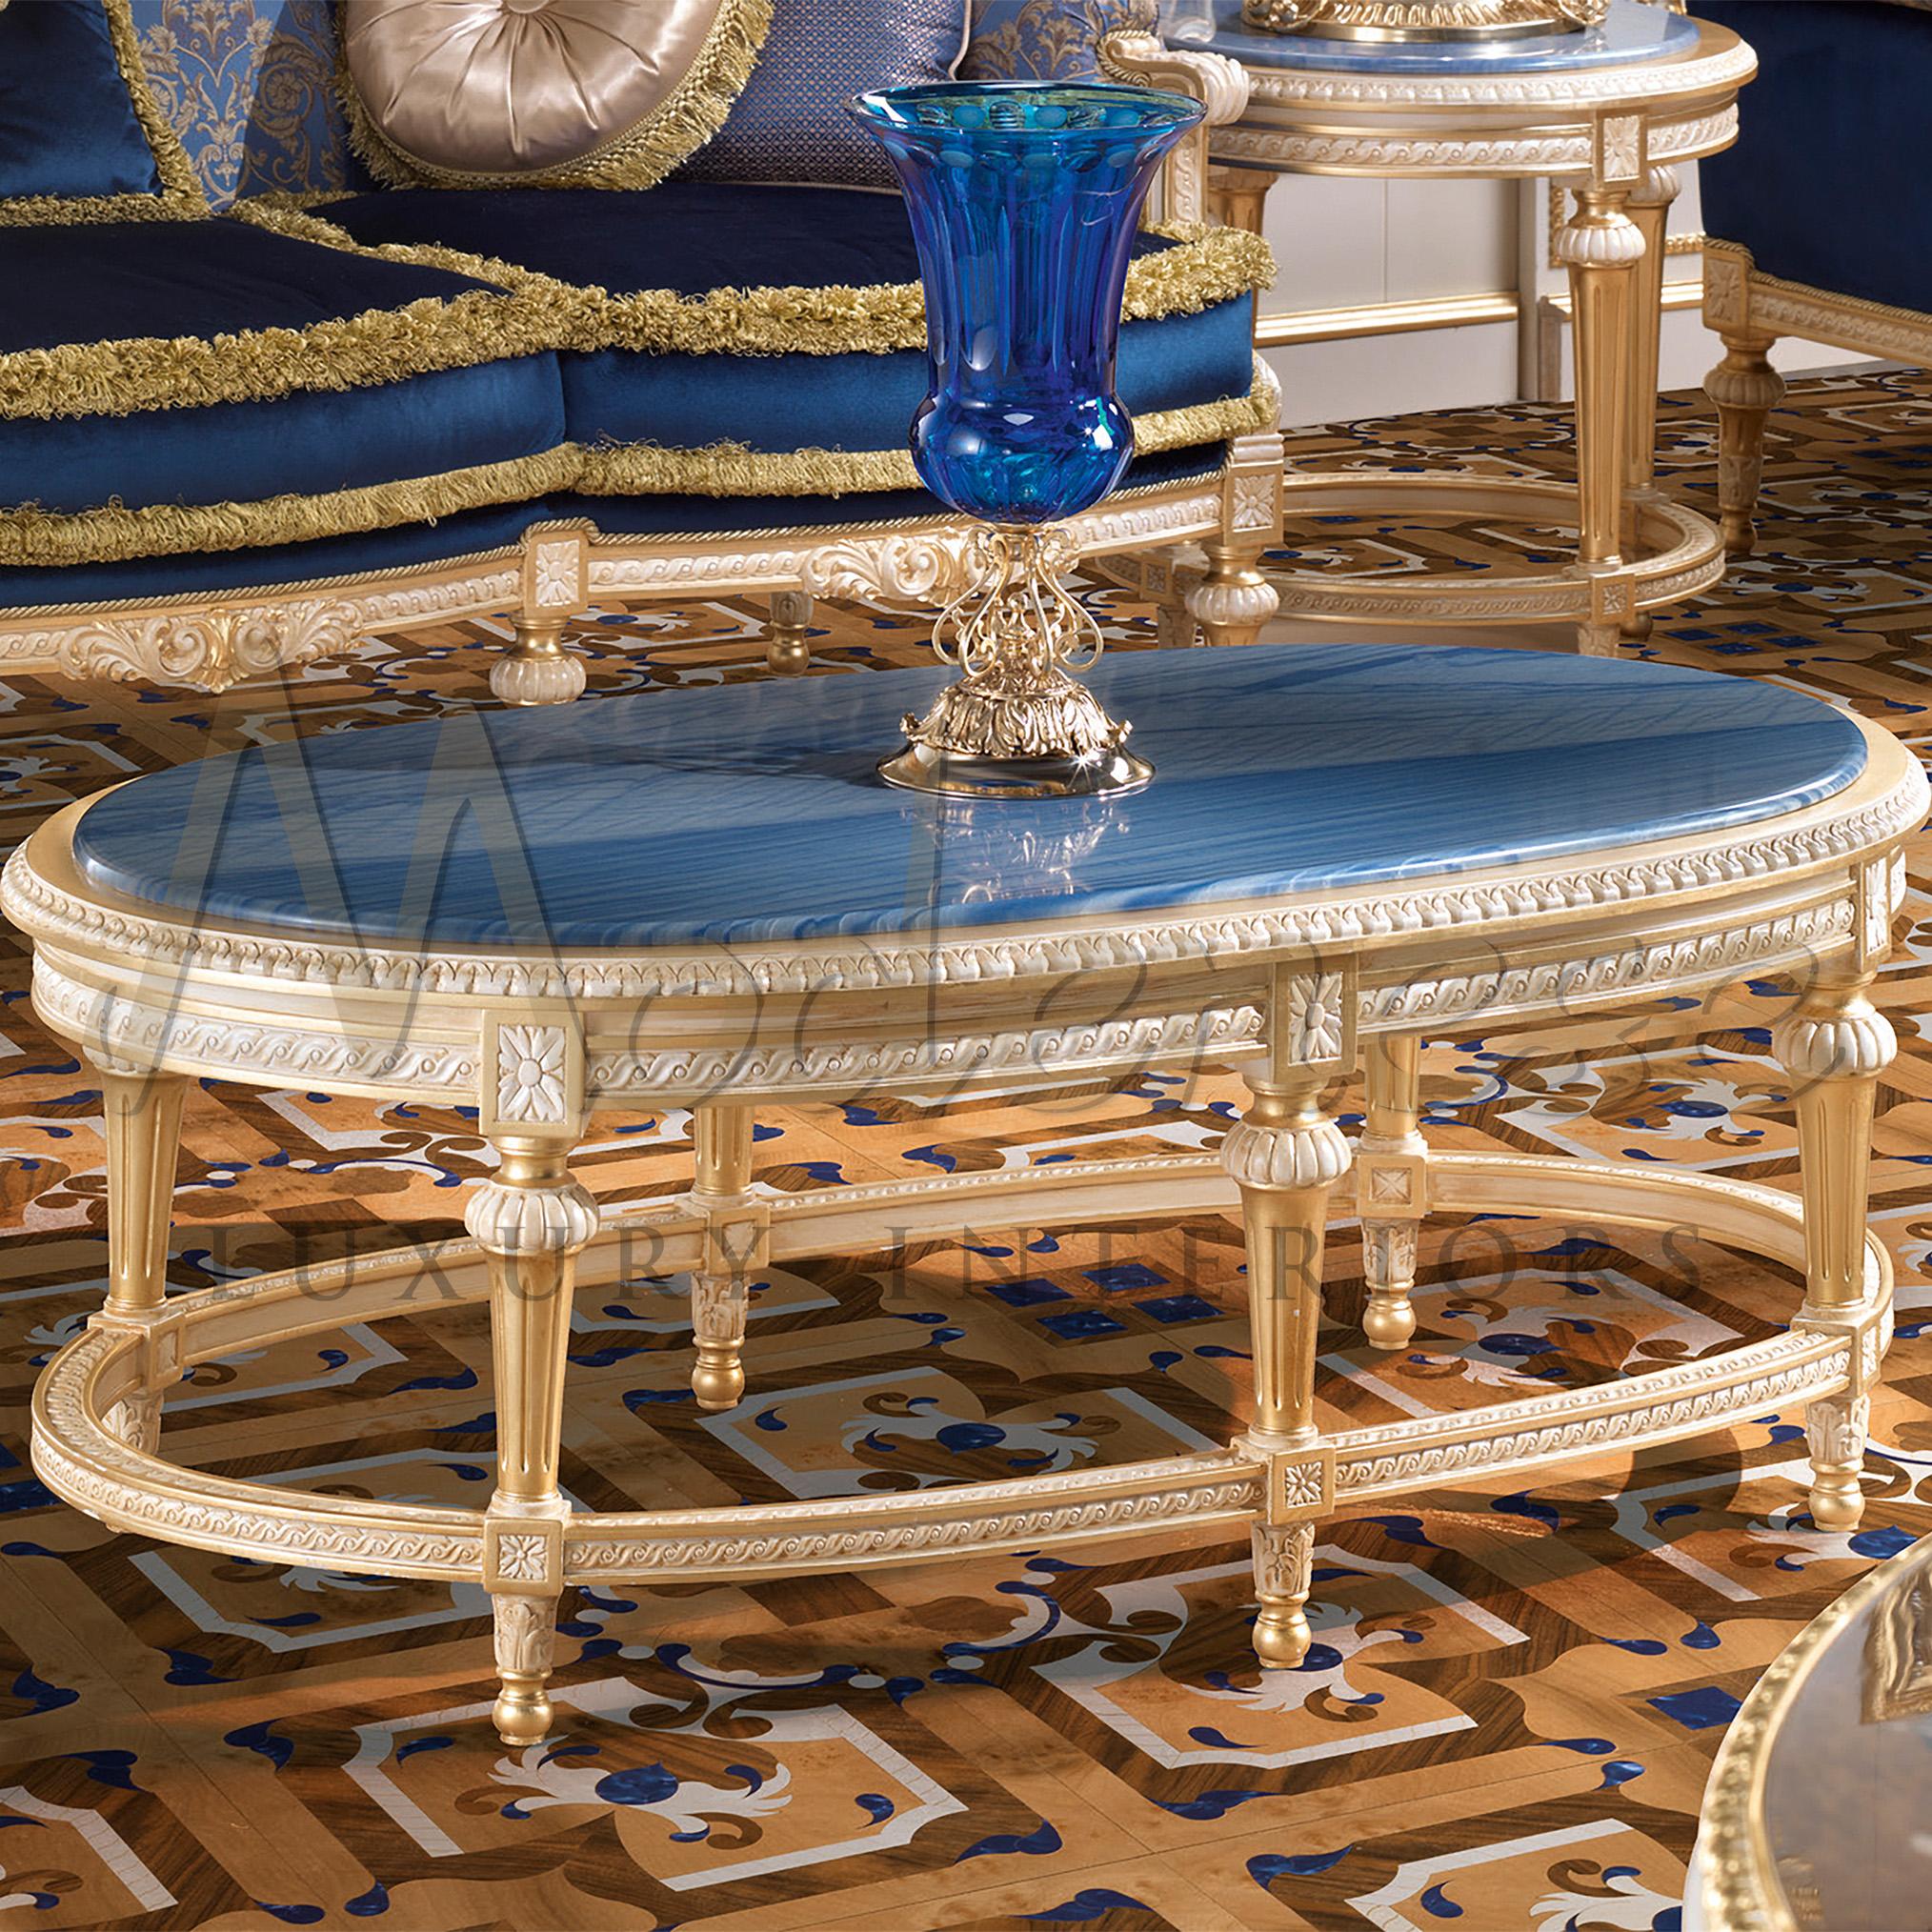 Modenese artisans knowledge of gold leaf applications goes beyond imagination. The true essence of their work is shown through this magnificent oval coffee table, that catches the eye with its tasteful combination of azul marble and shining gold